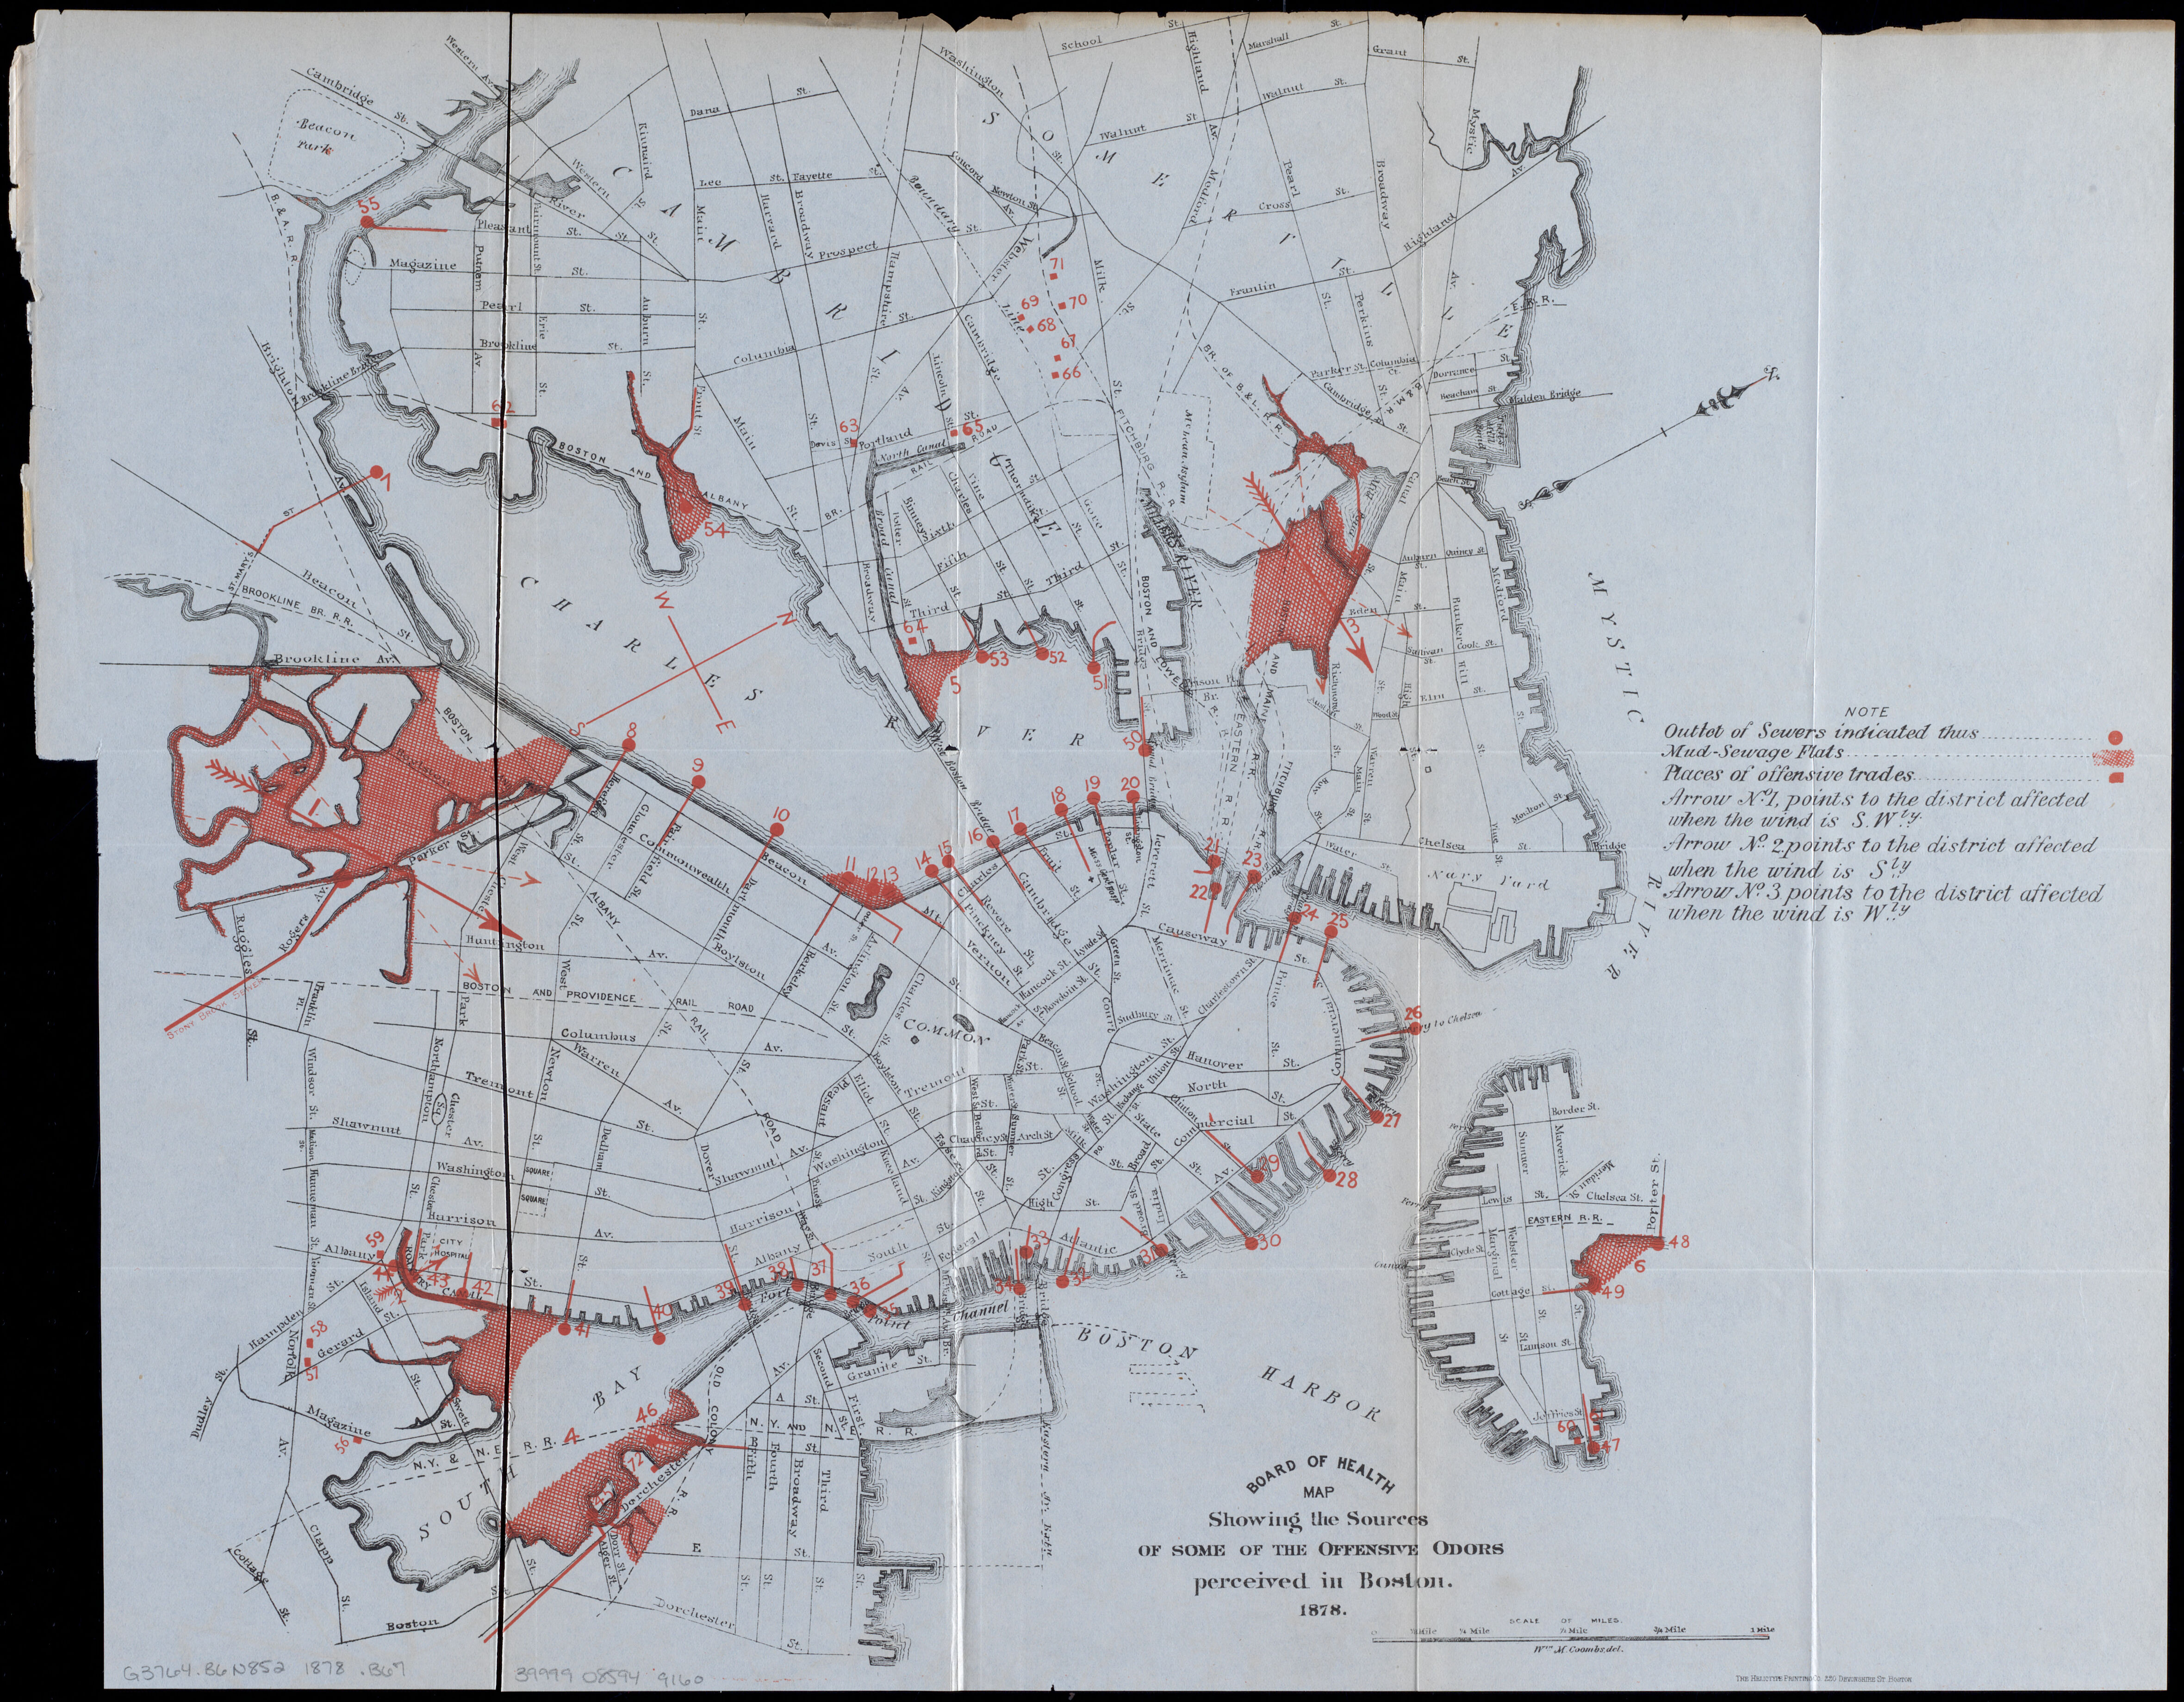 An 1878 map showing the sources of some of the offensive odors perceived in Boston from LMEC collections